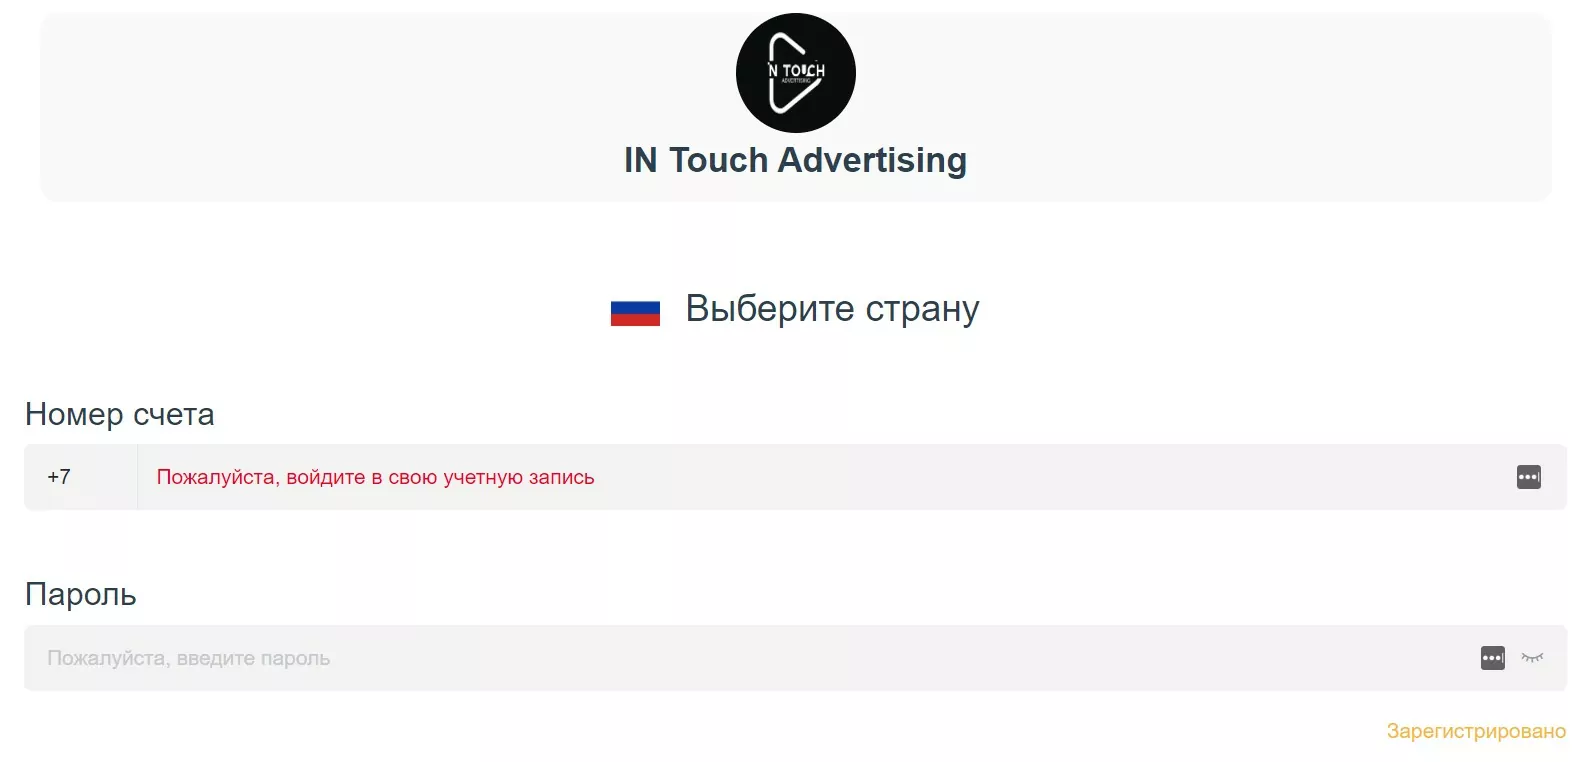 In Touch Media Advertising проект обзор